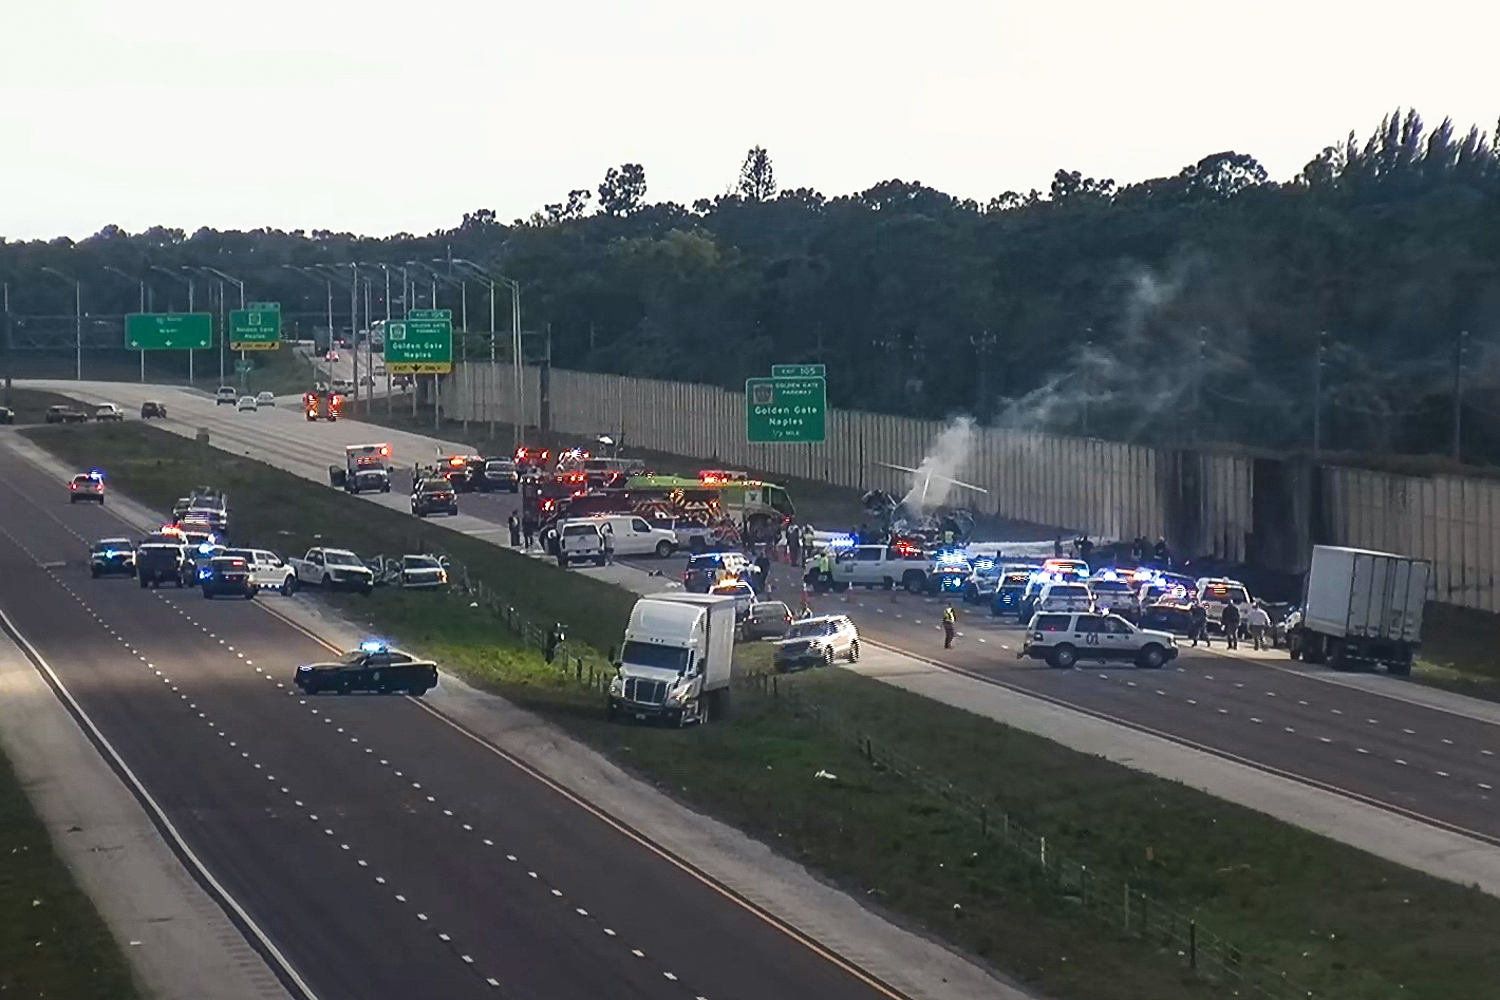 2 dead after private jet carrying 5 lands on Florida interstate and hits vehicle